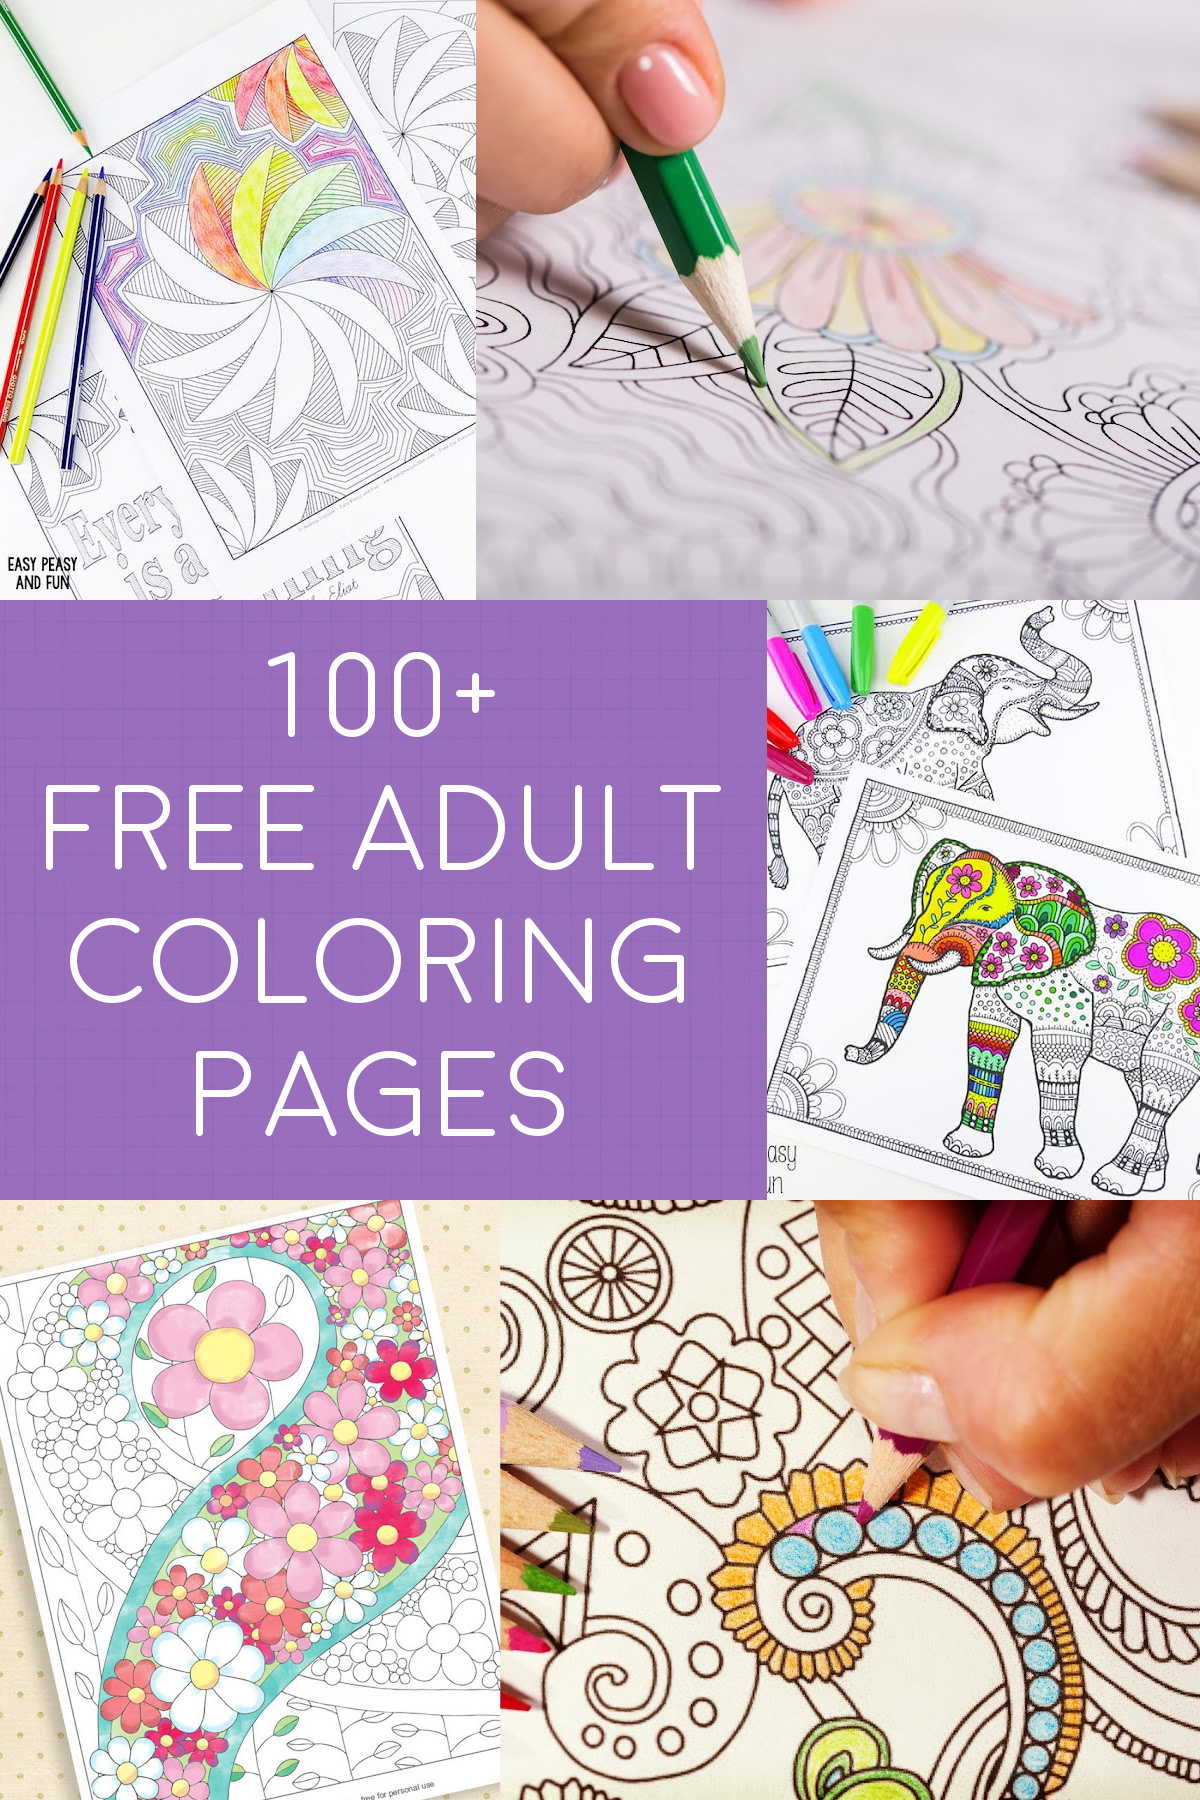 Free adult coloring pages - over one hundred